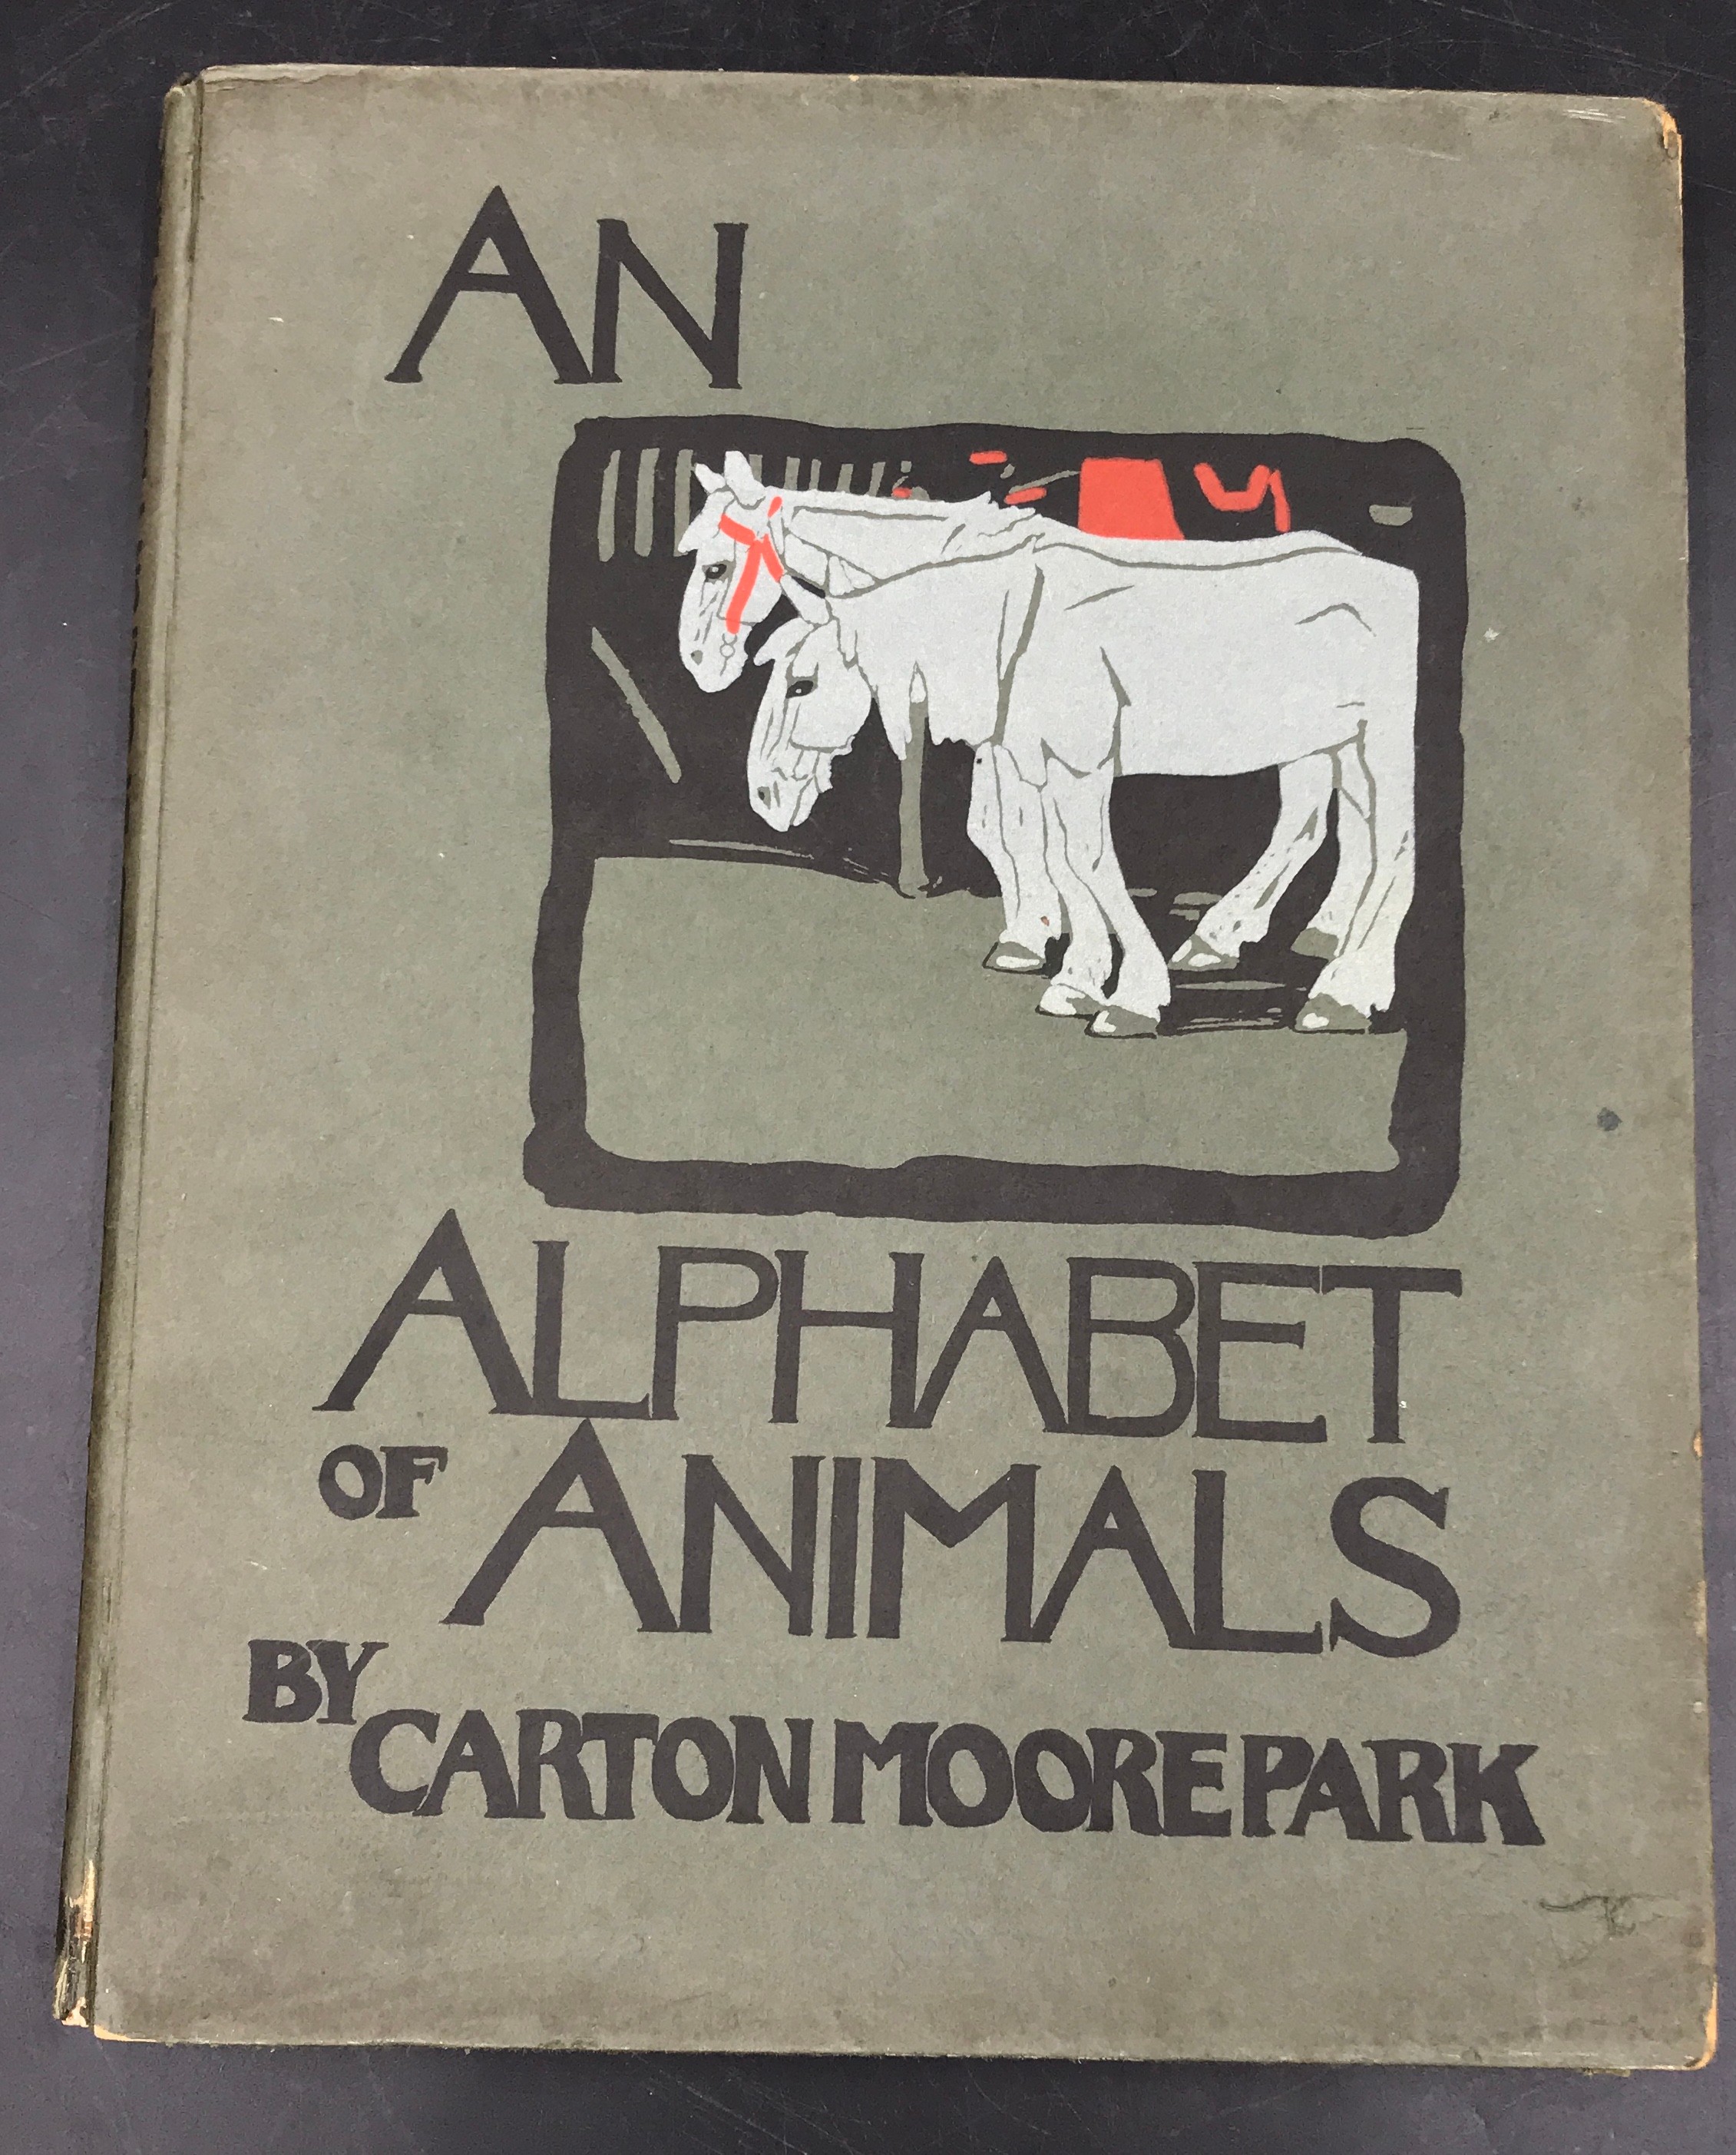 An Alphabet of Animals by Carton Moore Park, signed inside front cover by the author in 1898.